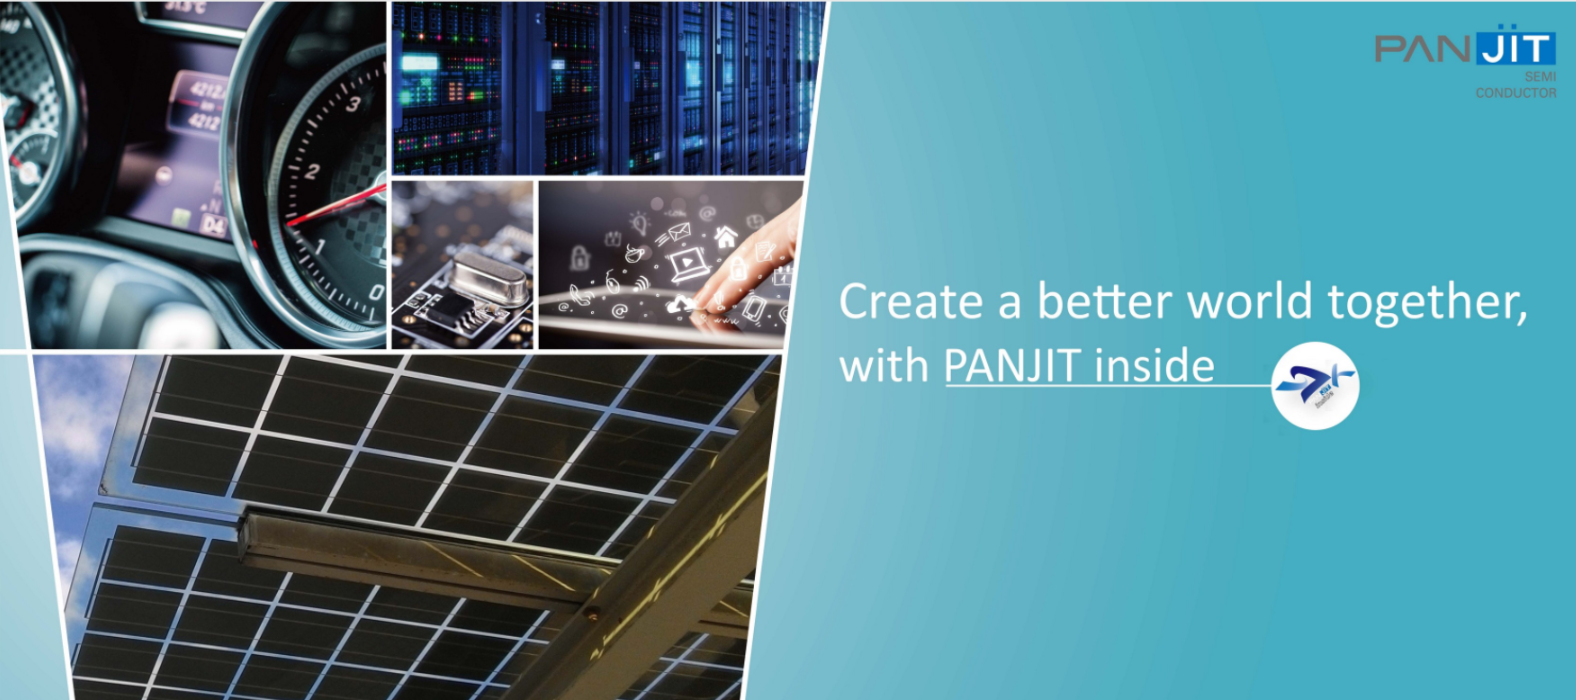 Create a better world together with Panjit inside.